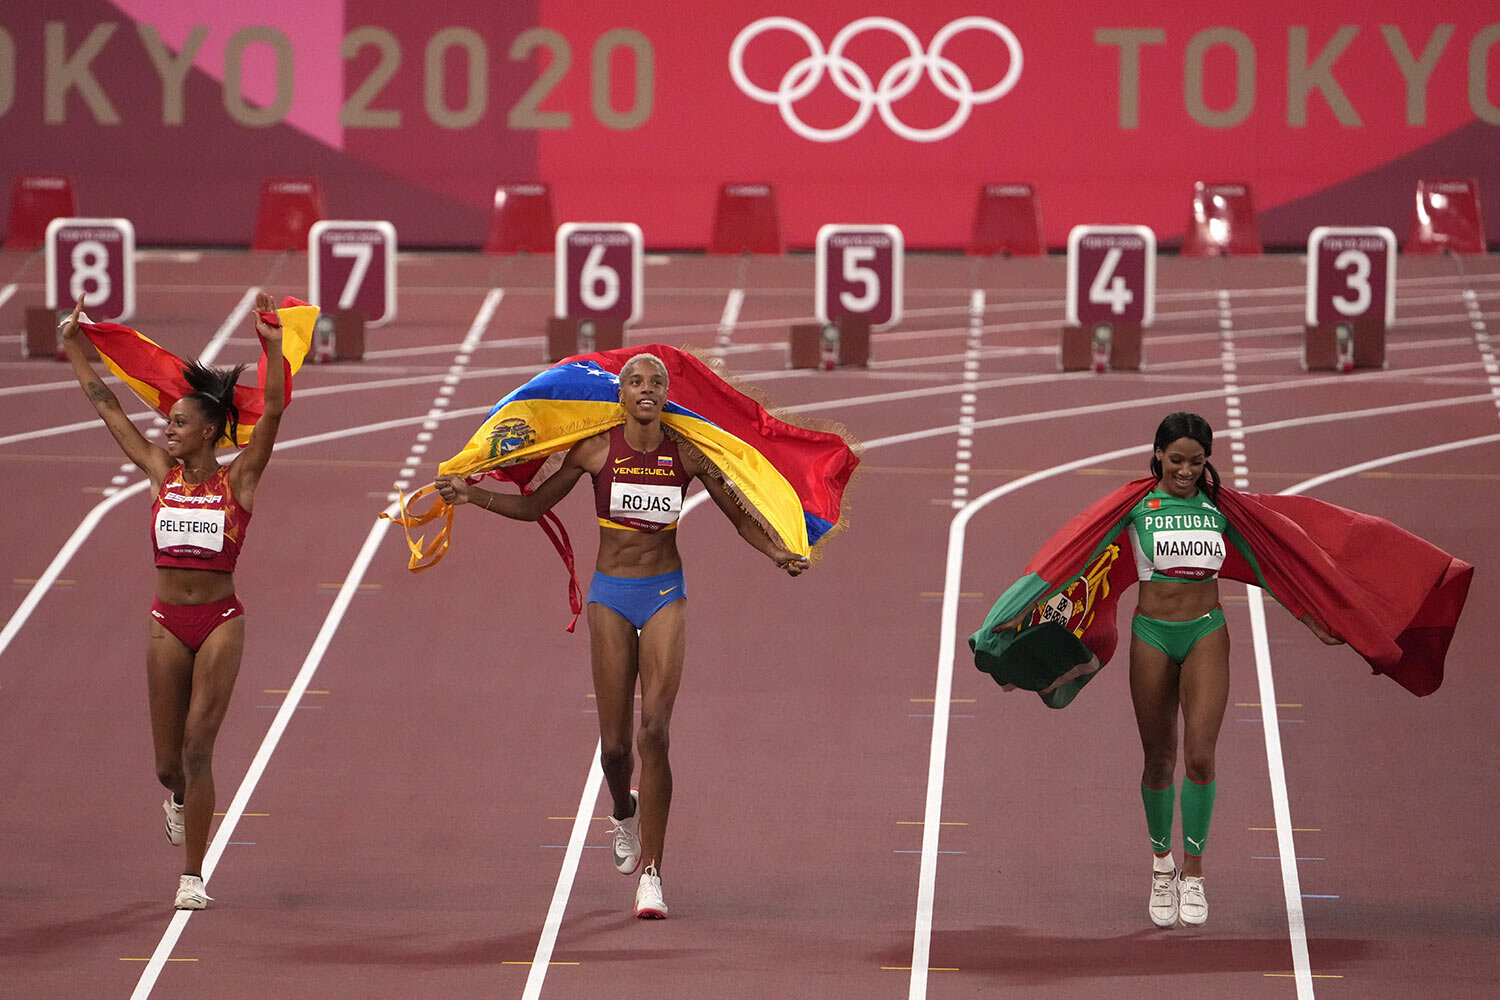  Gold medalist Yulimar Rojas of Venezuela, center, silver medalist Patricia Mamona of Portugal, right, and bronze medalist Ana Peleteiro of Spain, celebrate on the track following the final of the women's triple jump at the 2020 Summer Olympics, Sund